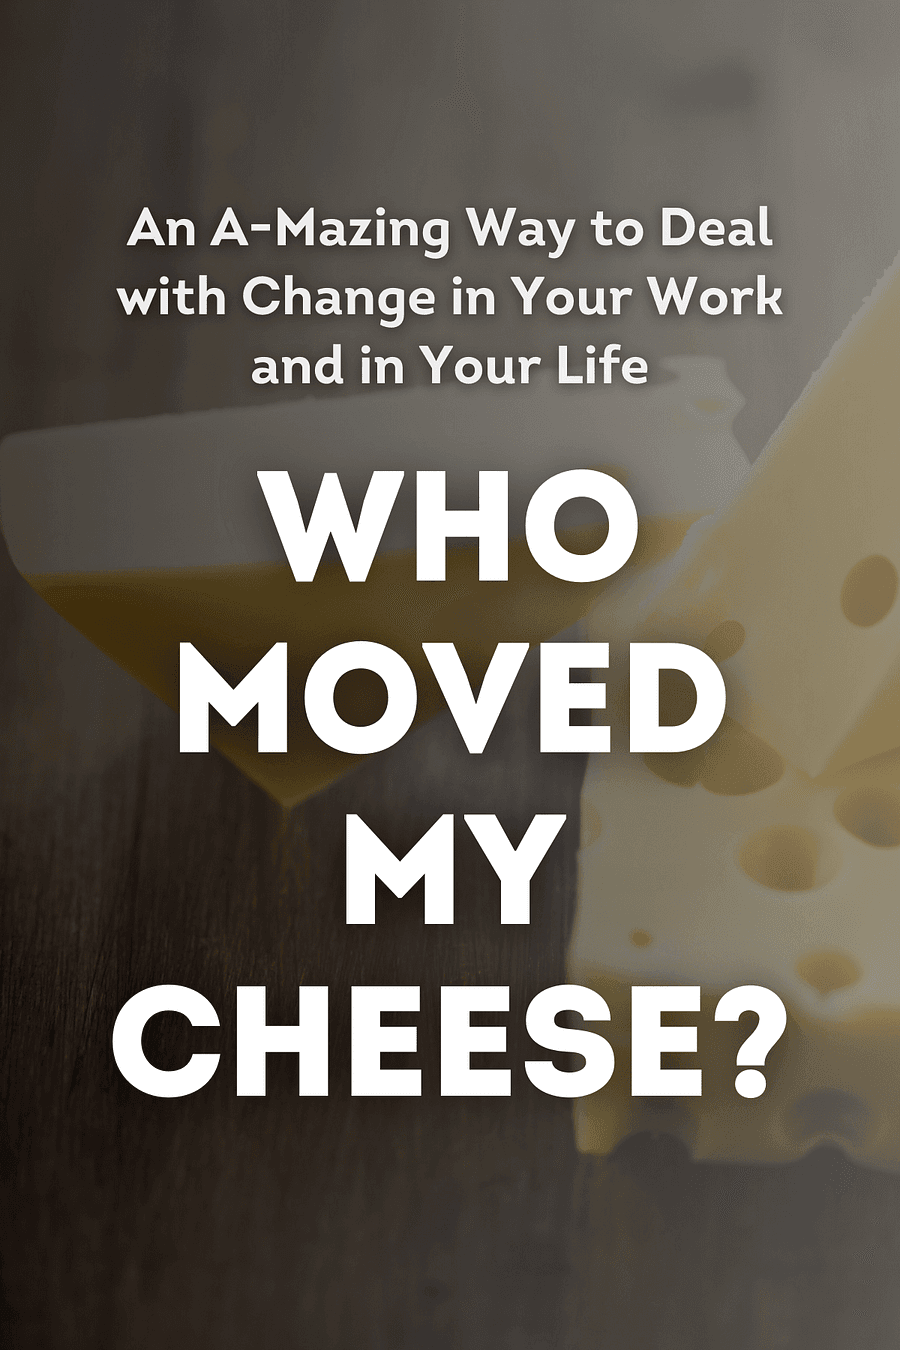 Who Moved My Cheese? by Spencer Johnson - Book Summary